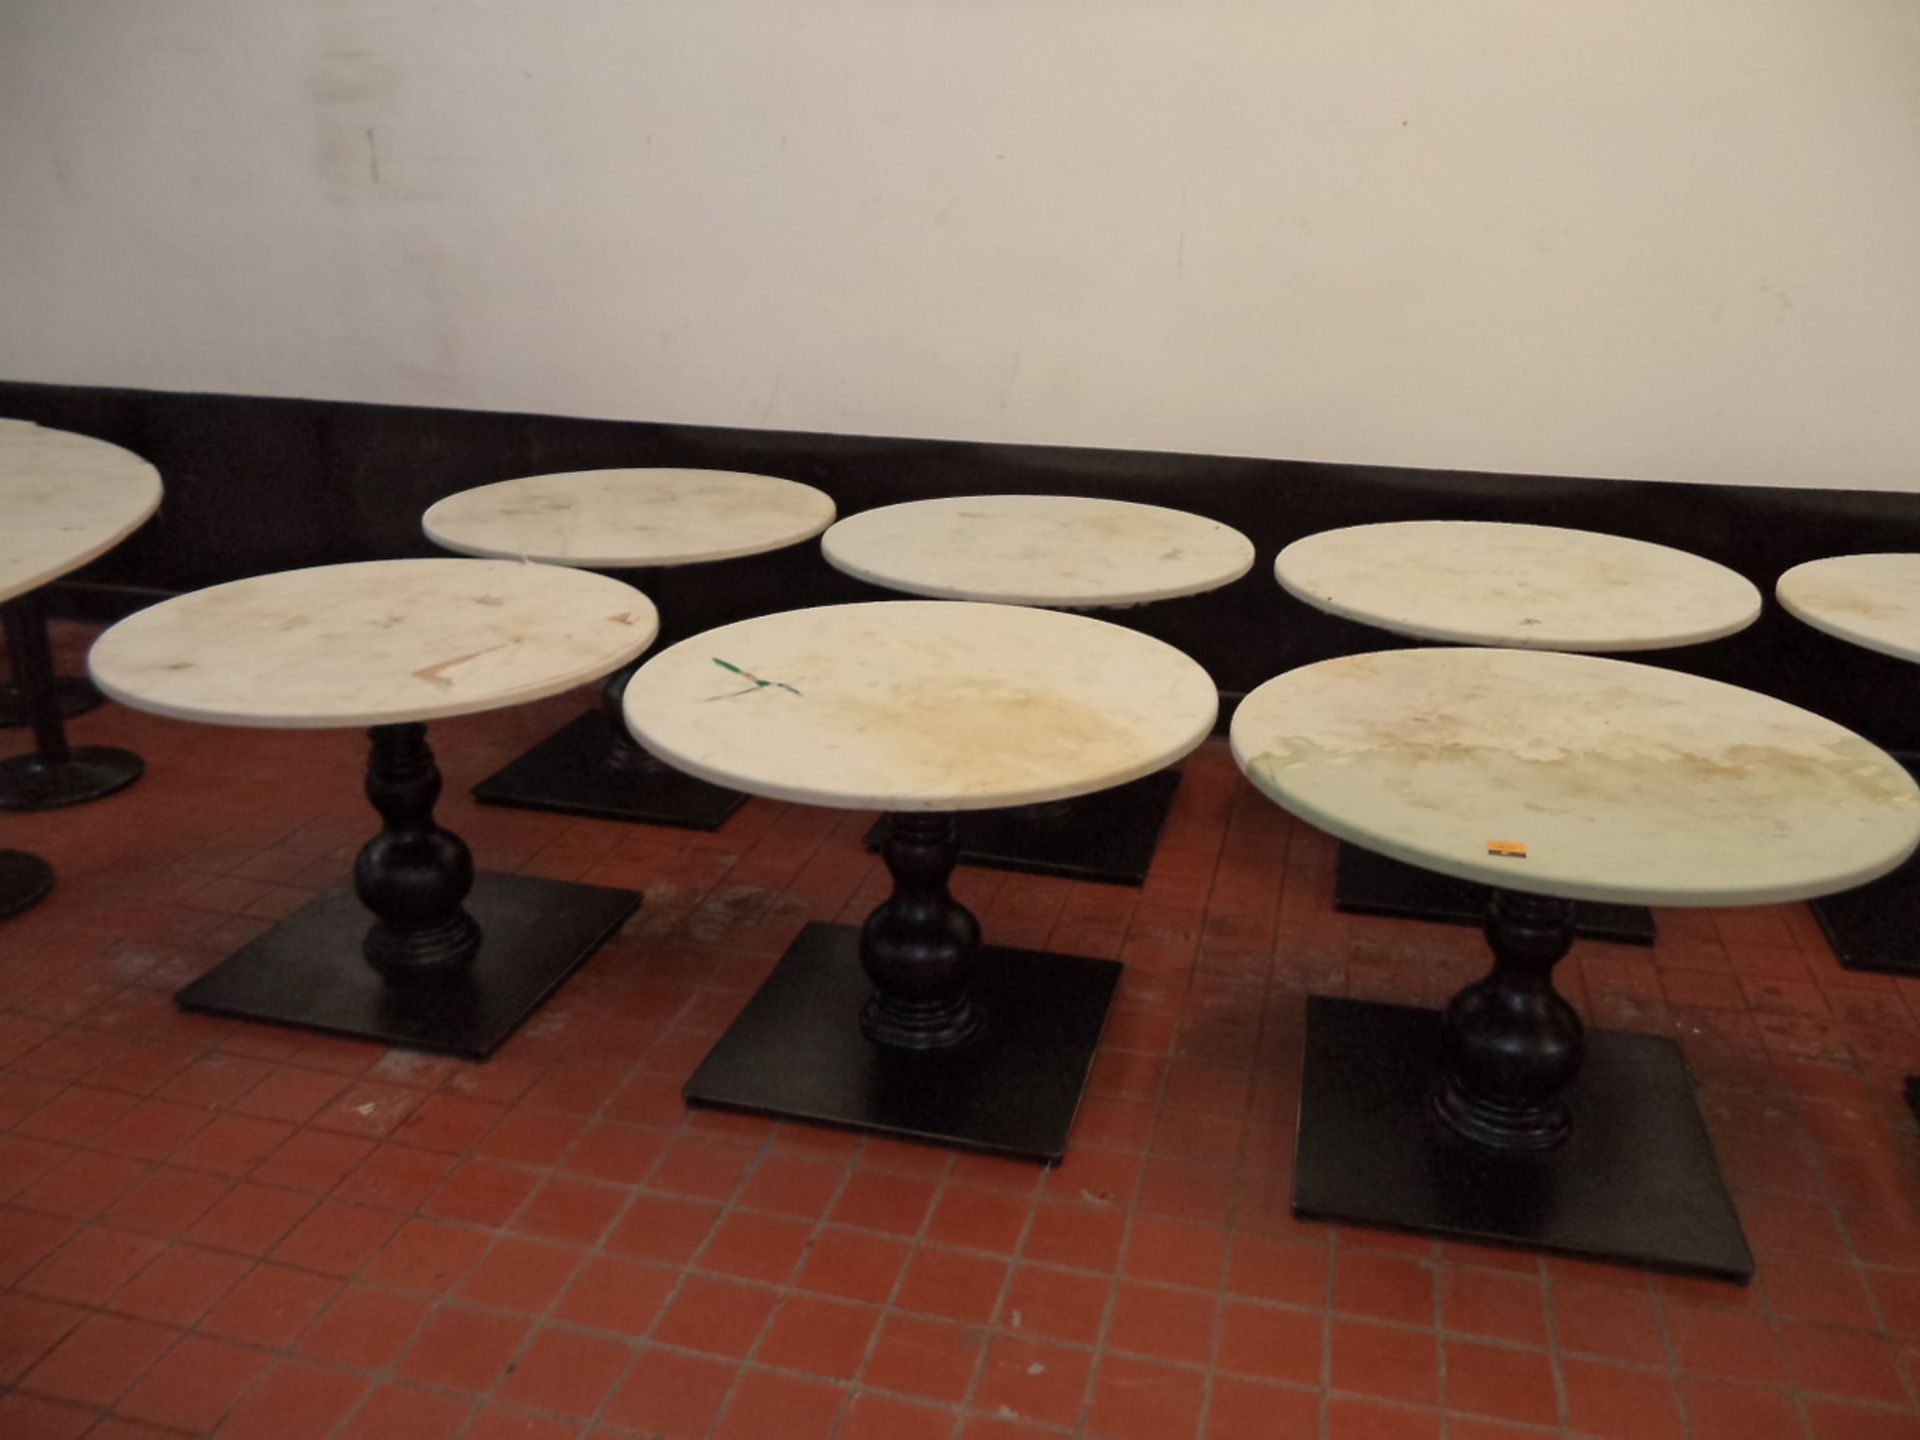 6 off 105cm diameter round dining tables.  The height of these tables is very approximately